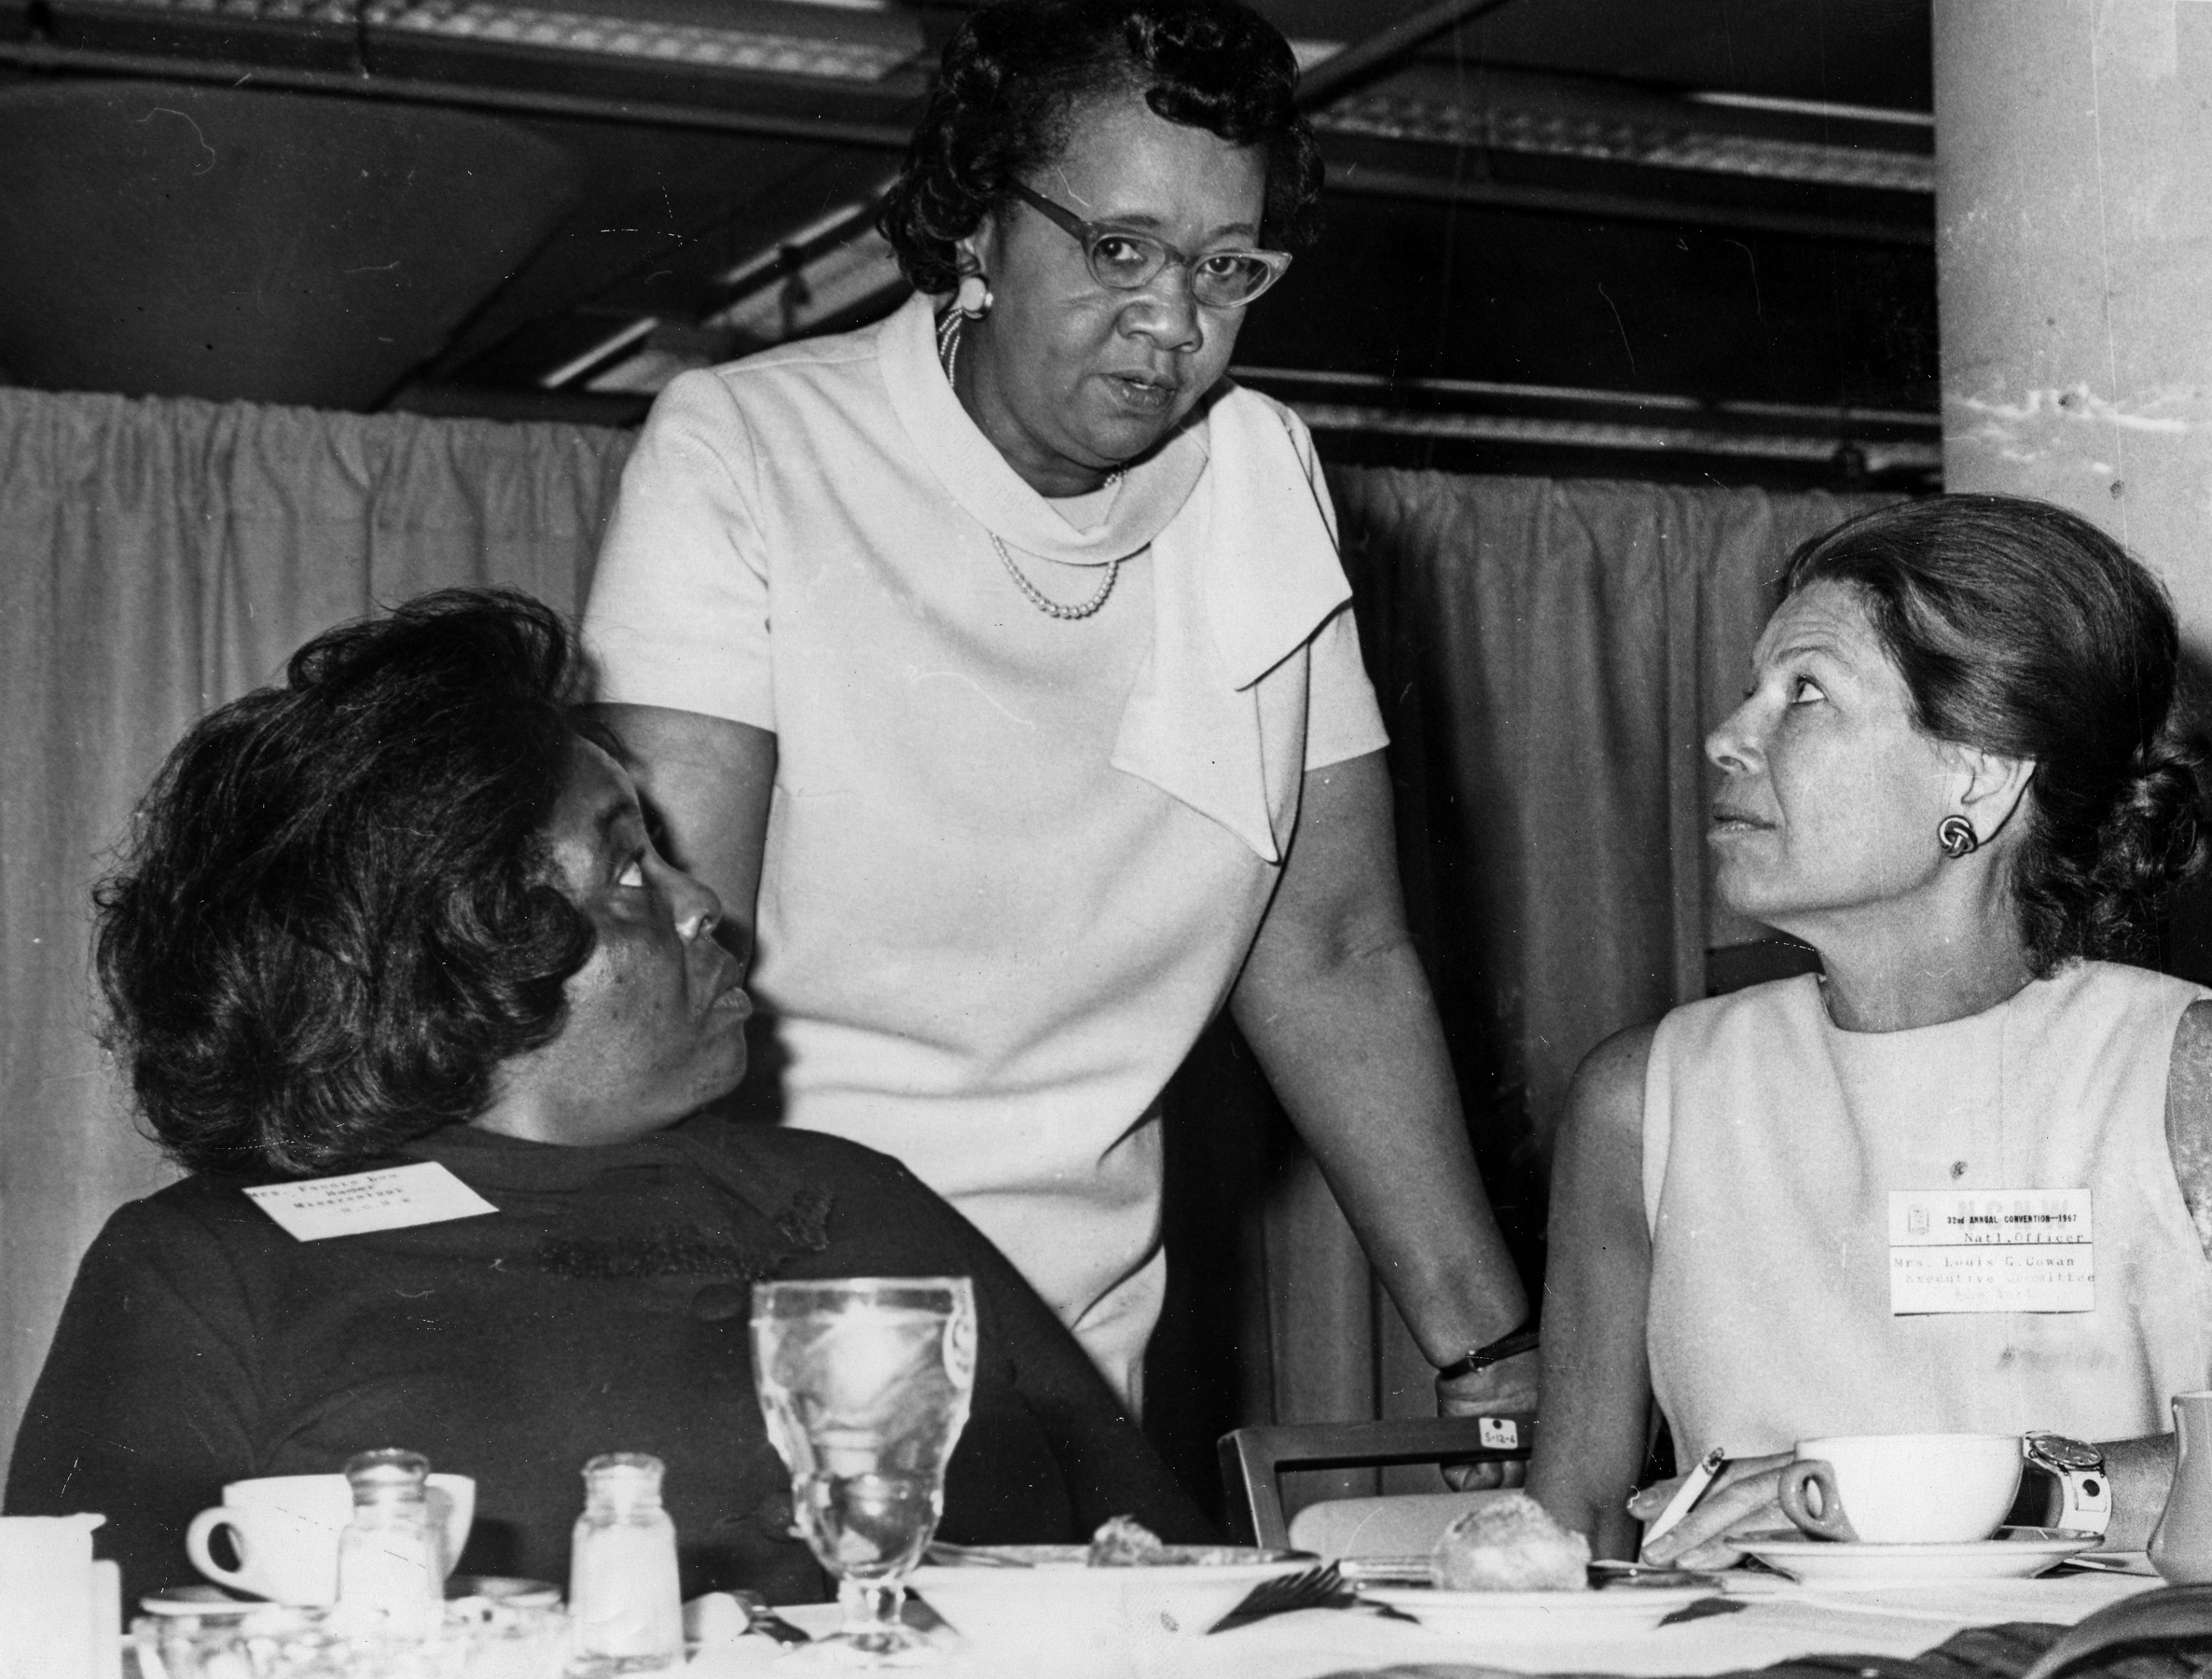 Left to right: Fannie Lou Hamer, Dorothy Height, and Polly Cowan at the 32nd NCNW annual convention, November 1967.